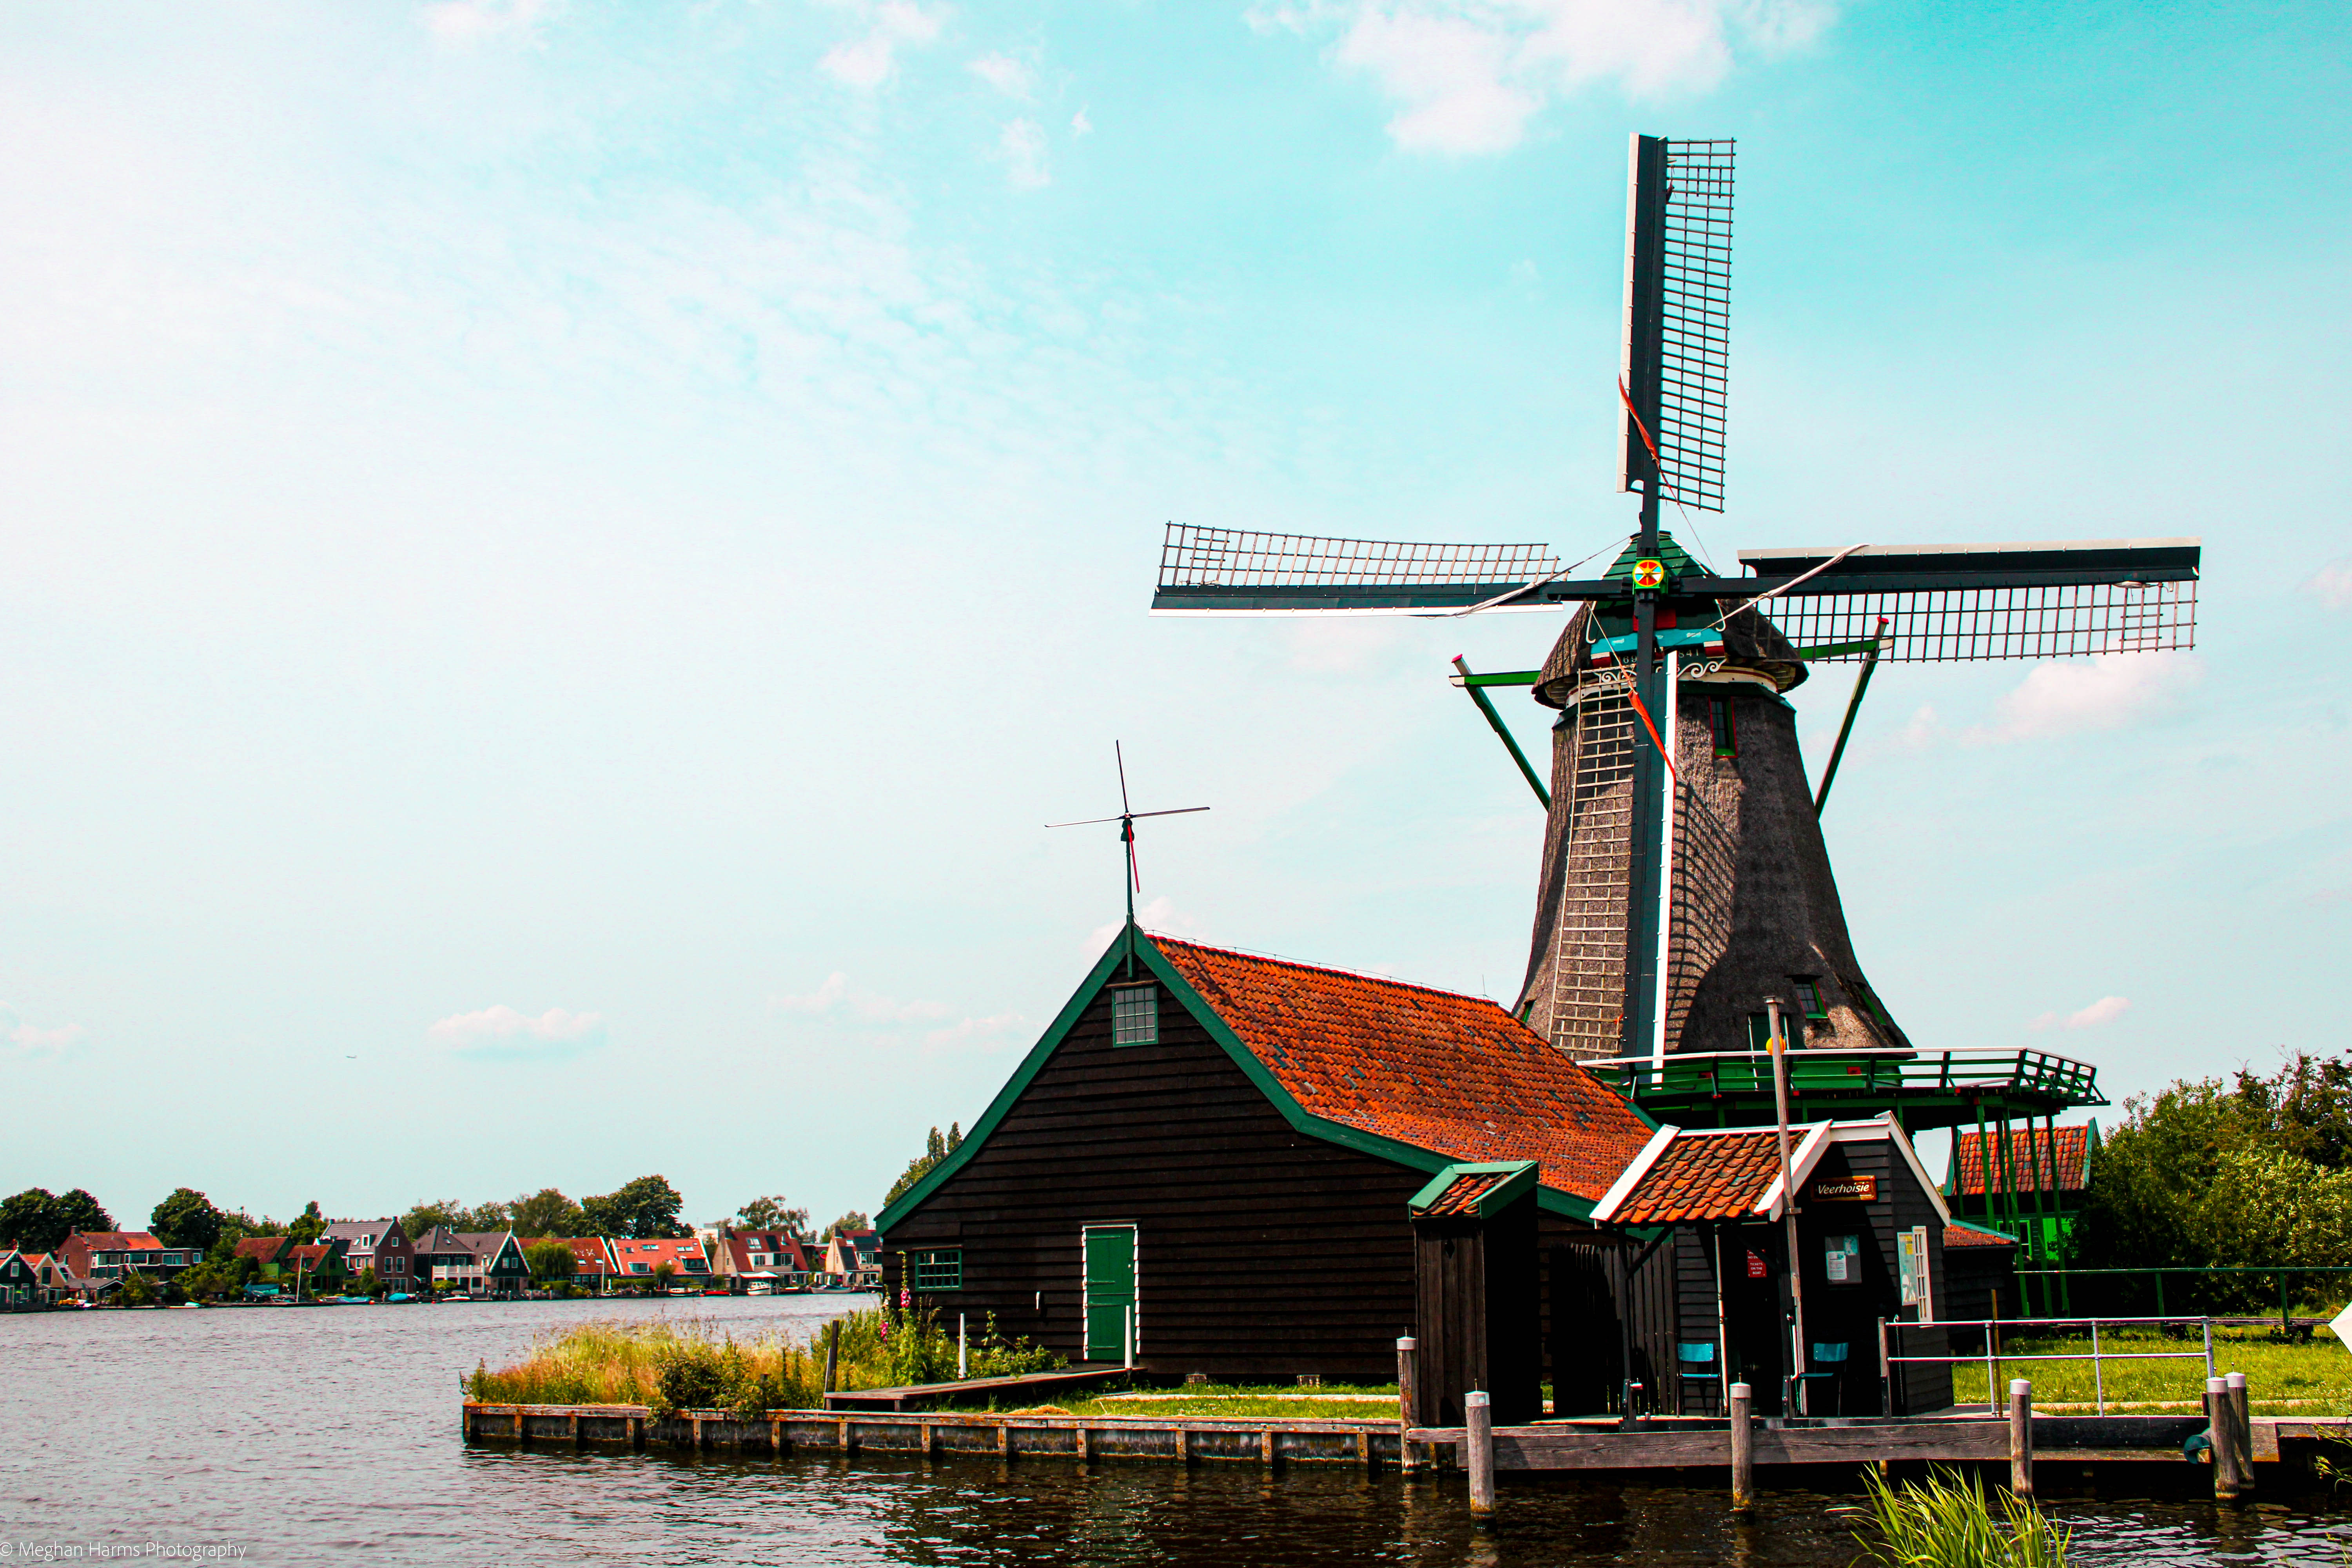 Windmill next to a red roof and brown shingle barn sitting on a lake